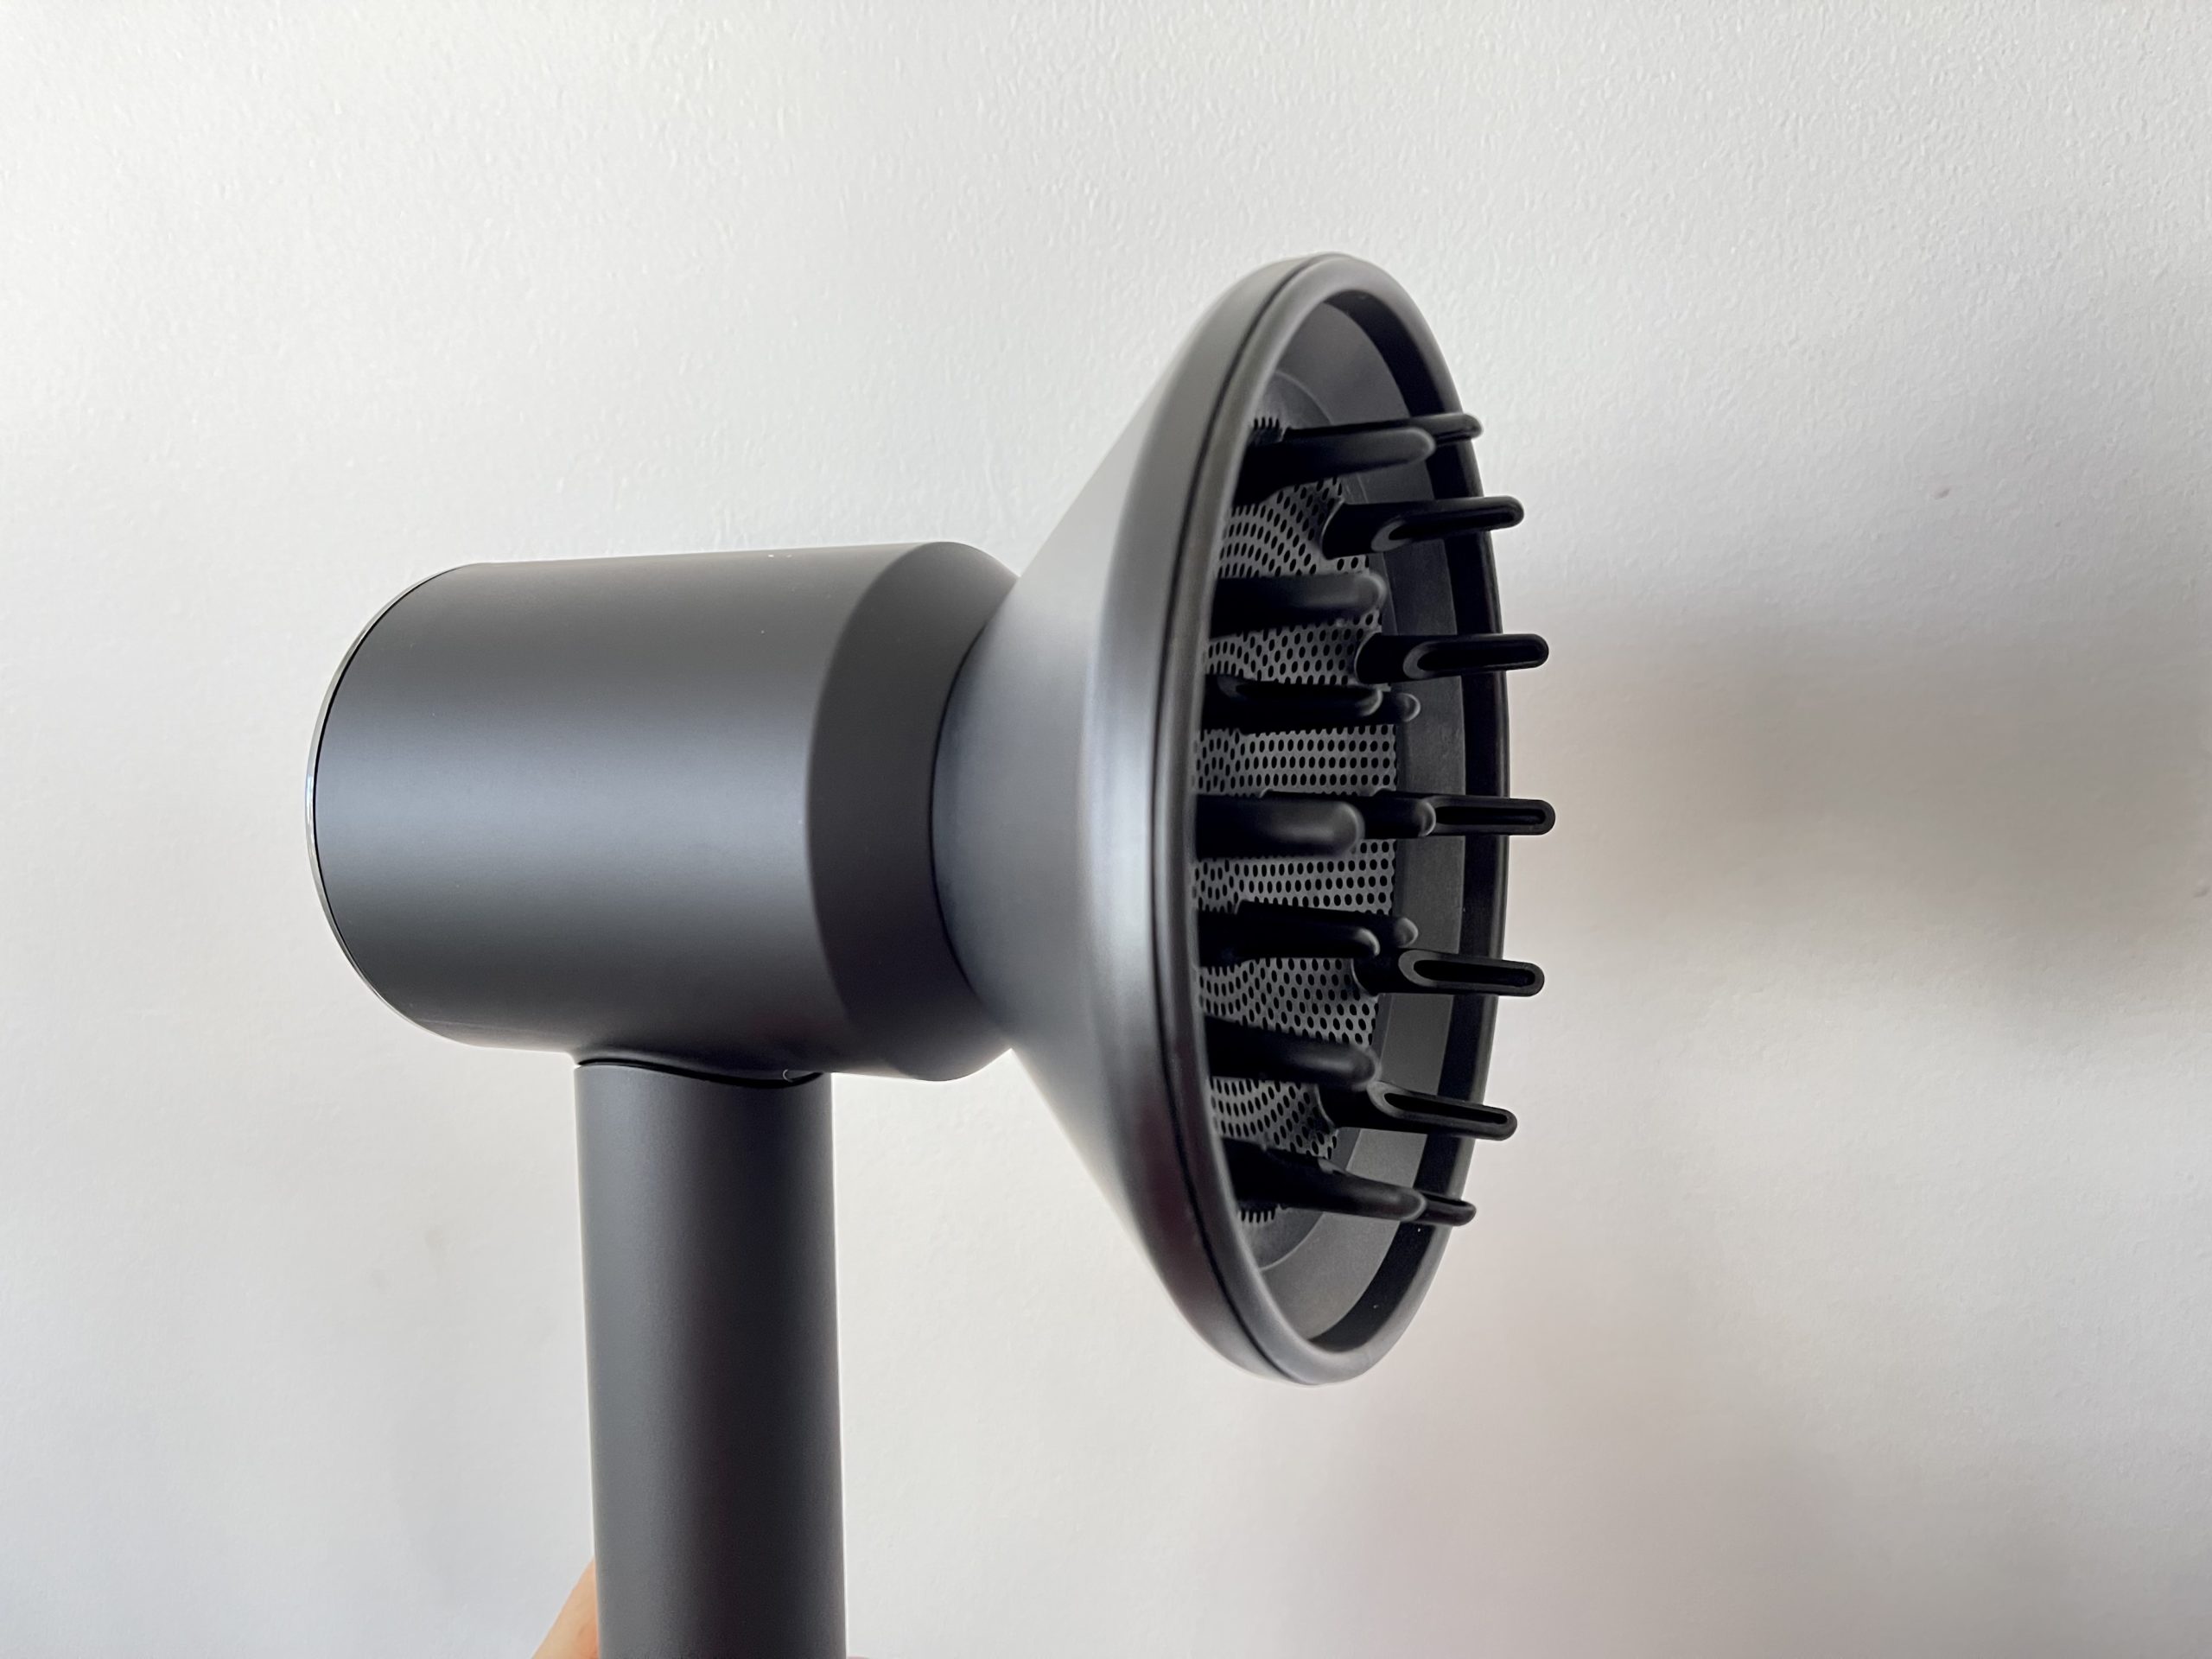 Dyson diffuser attachment for supersonic hair dryer